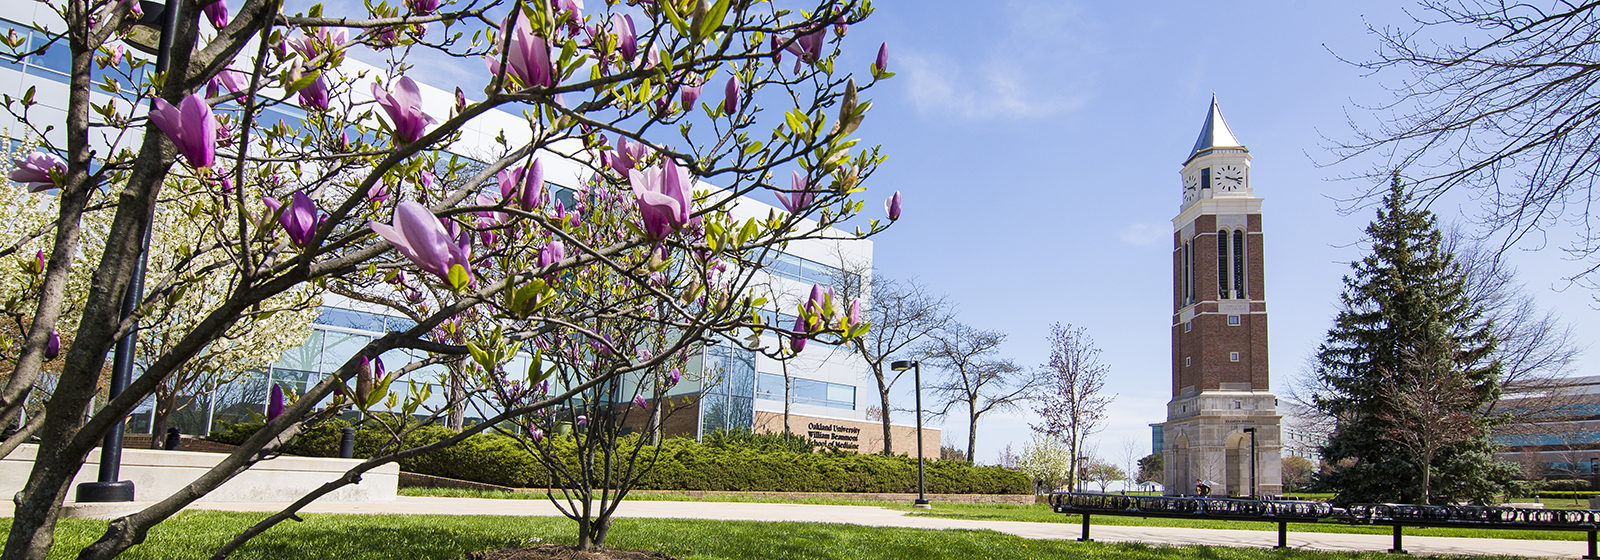 An image of OU's campus in spring